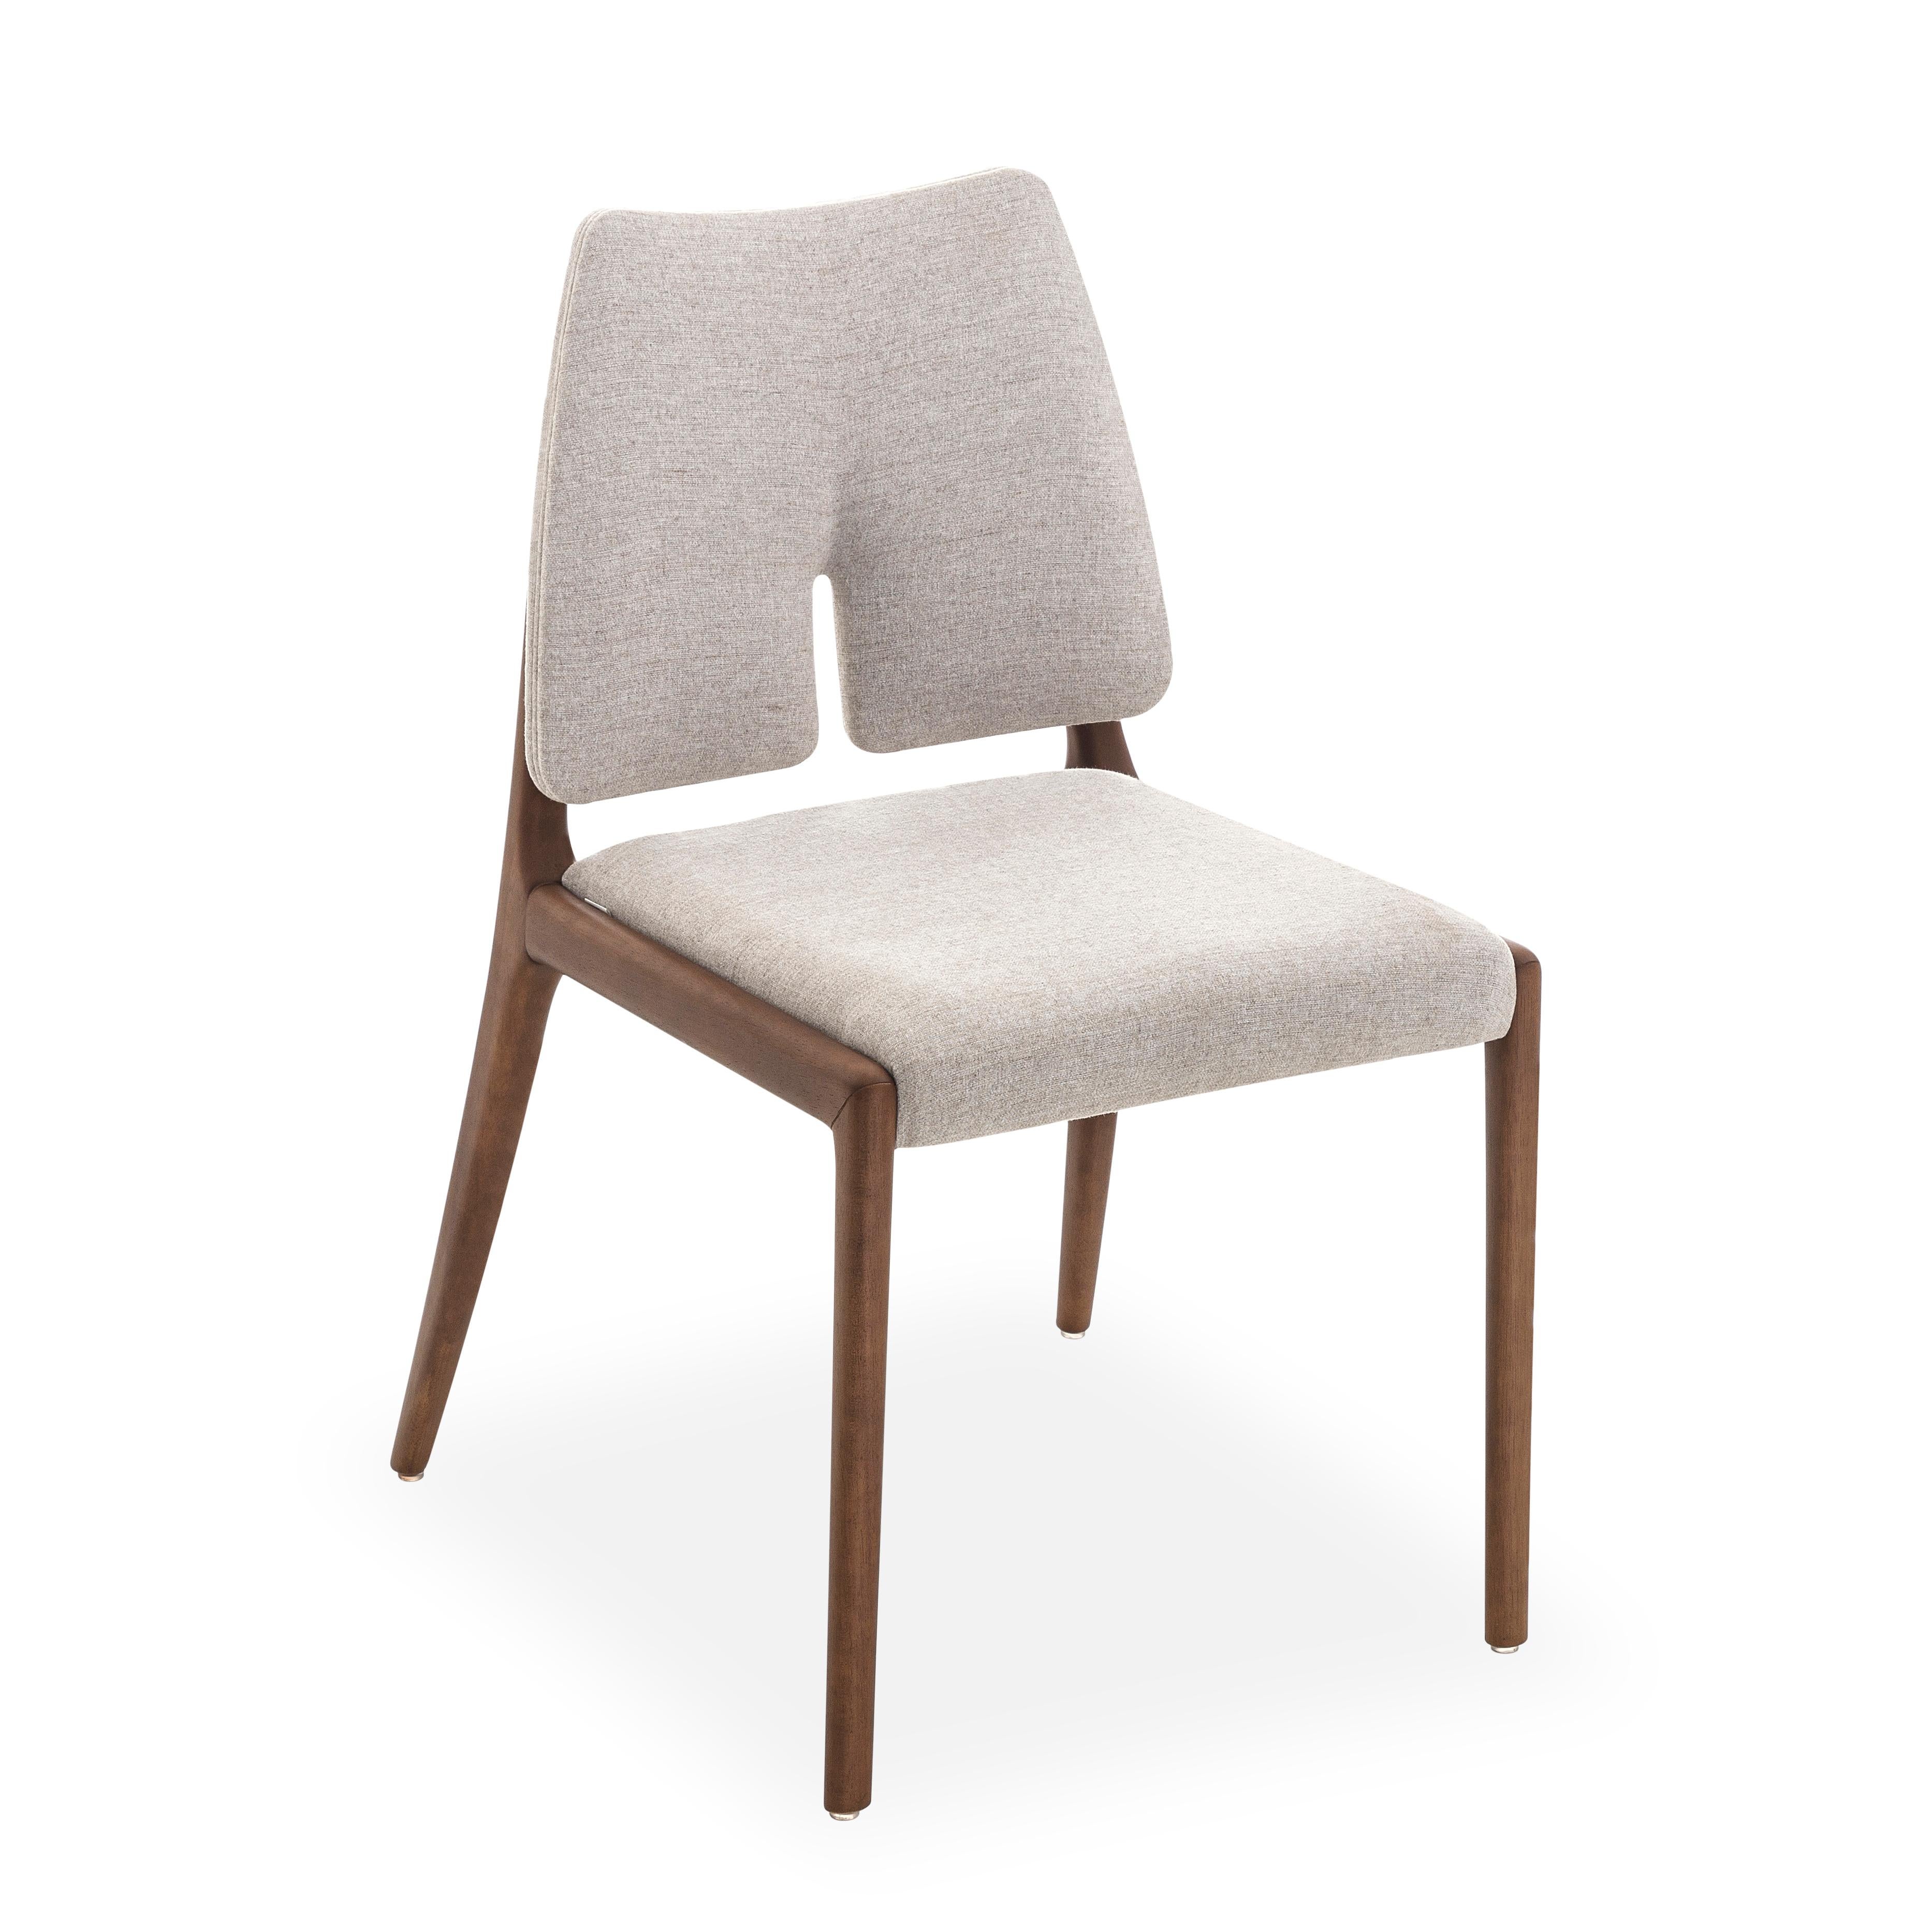 Contemporary Slit Dining Chair in Walnut Wood Finish and Light Beige Cotton Fabric, Set of 2 For Sale